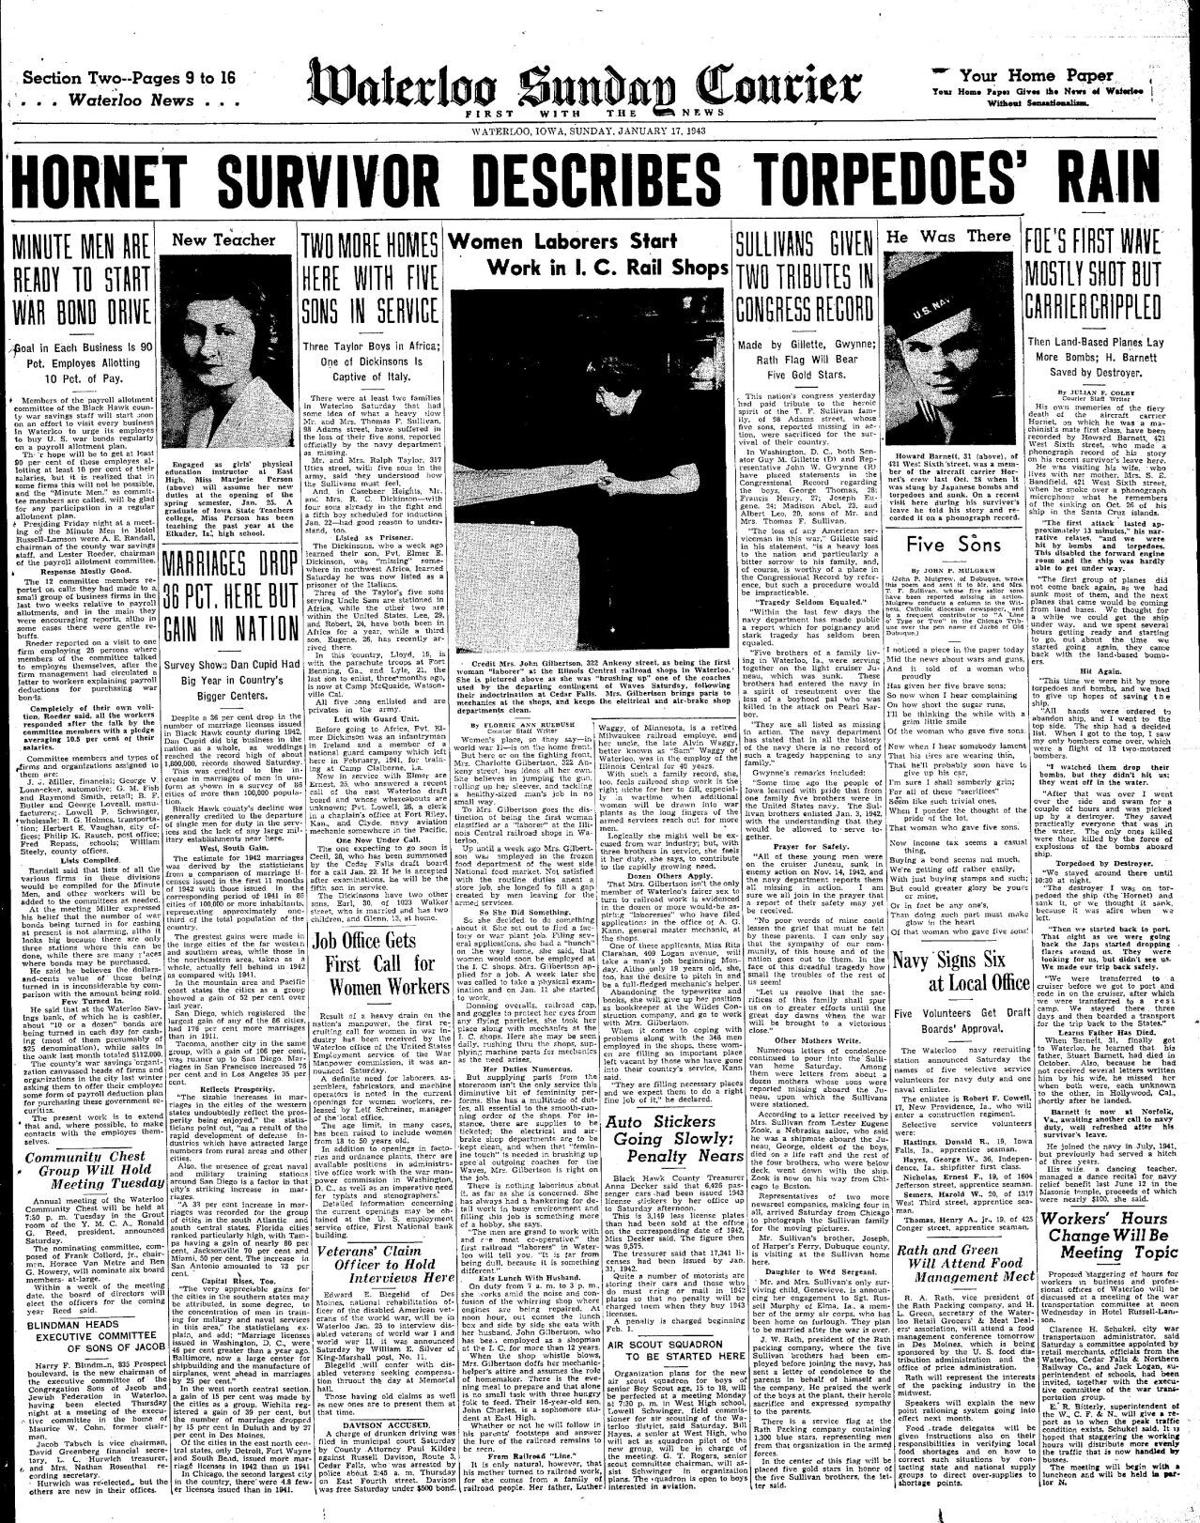 Courier Jan. 17, 1943